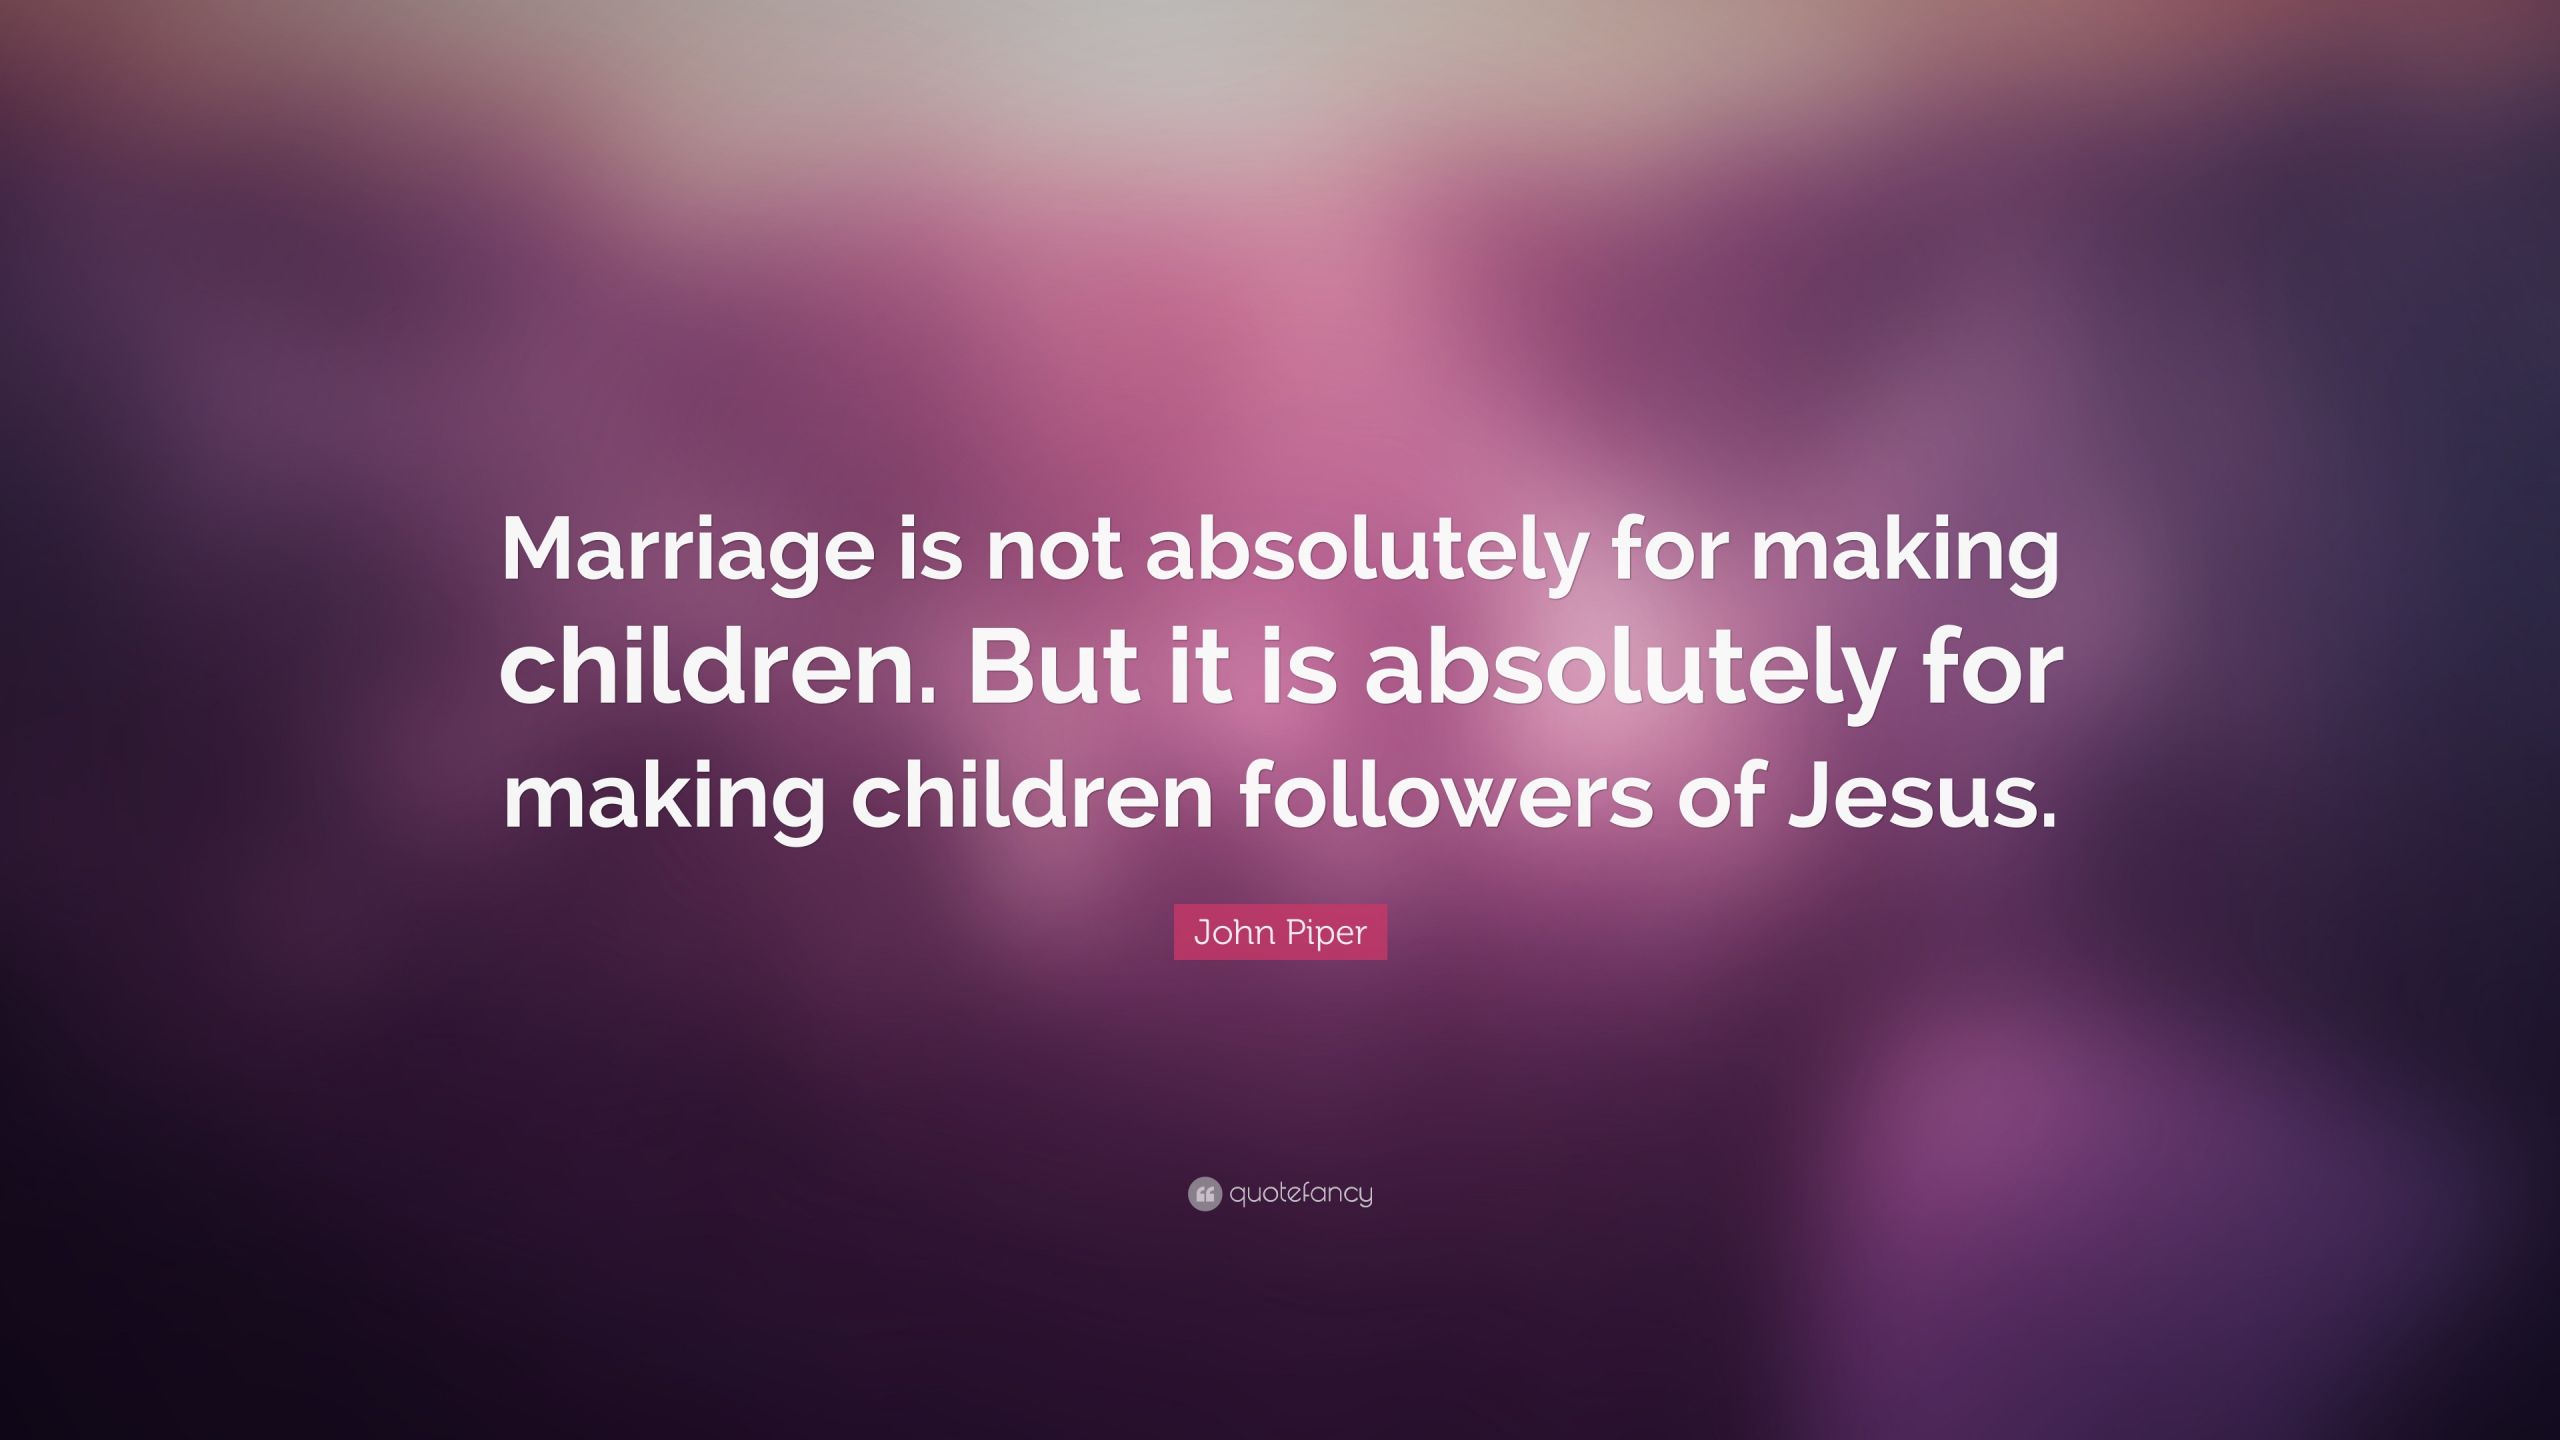 John Piper Marriage Quote
 John Piper Quote “Marriage is not absolutely for making